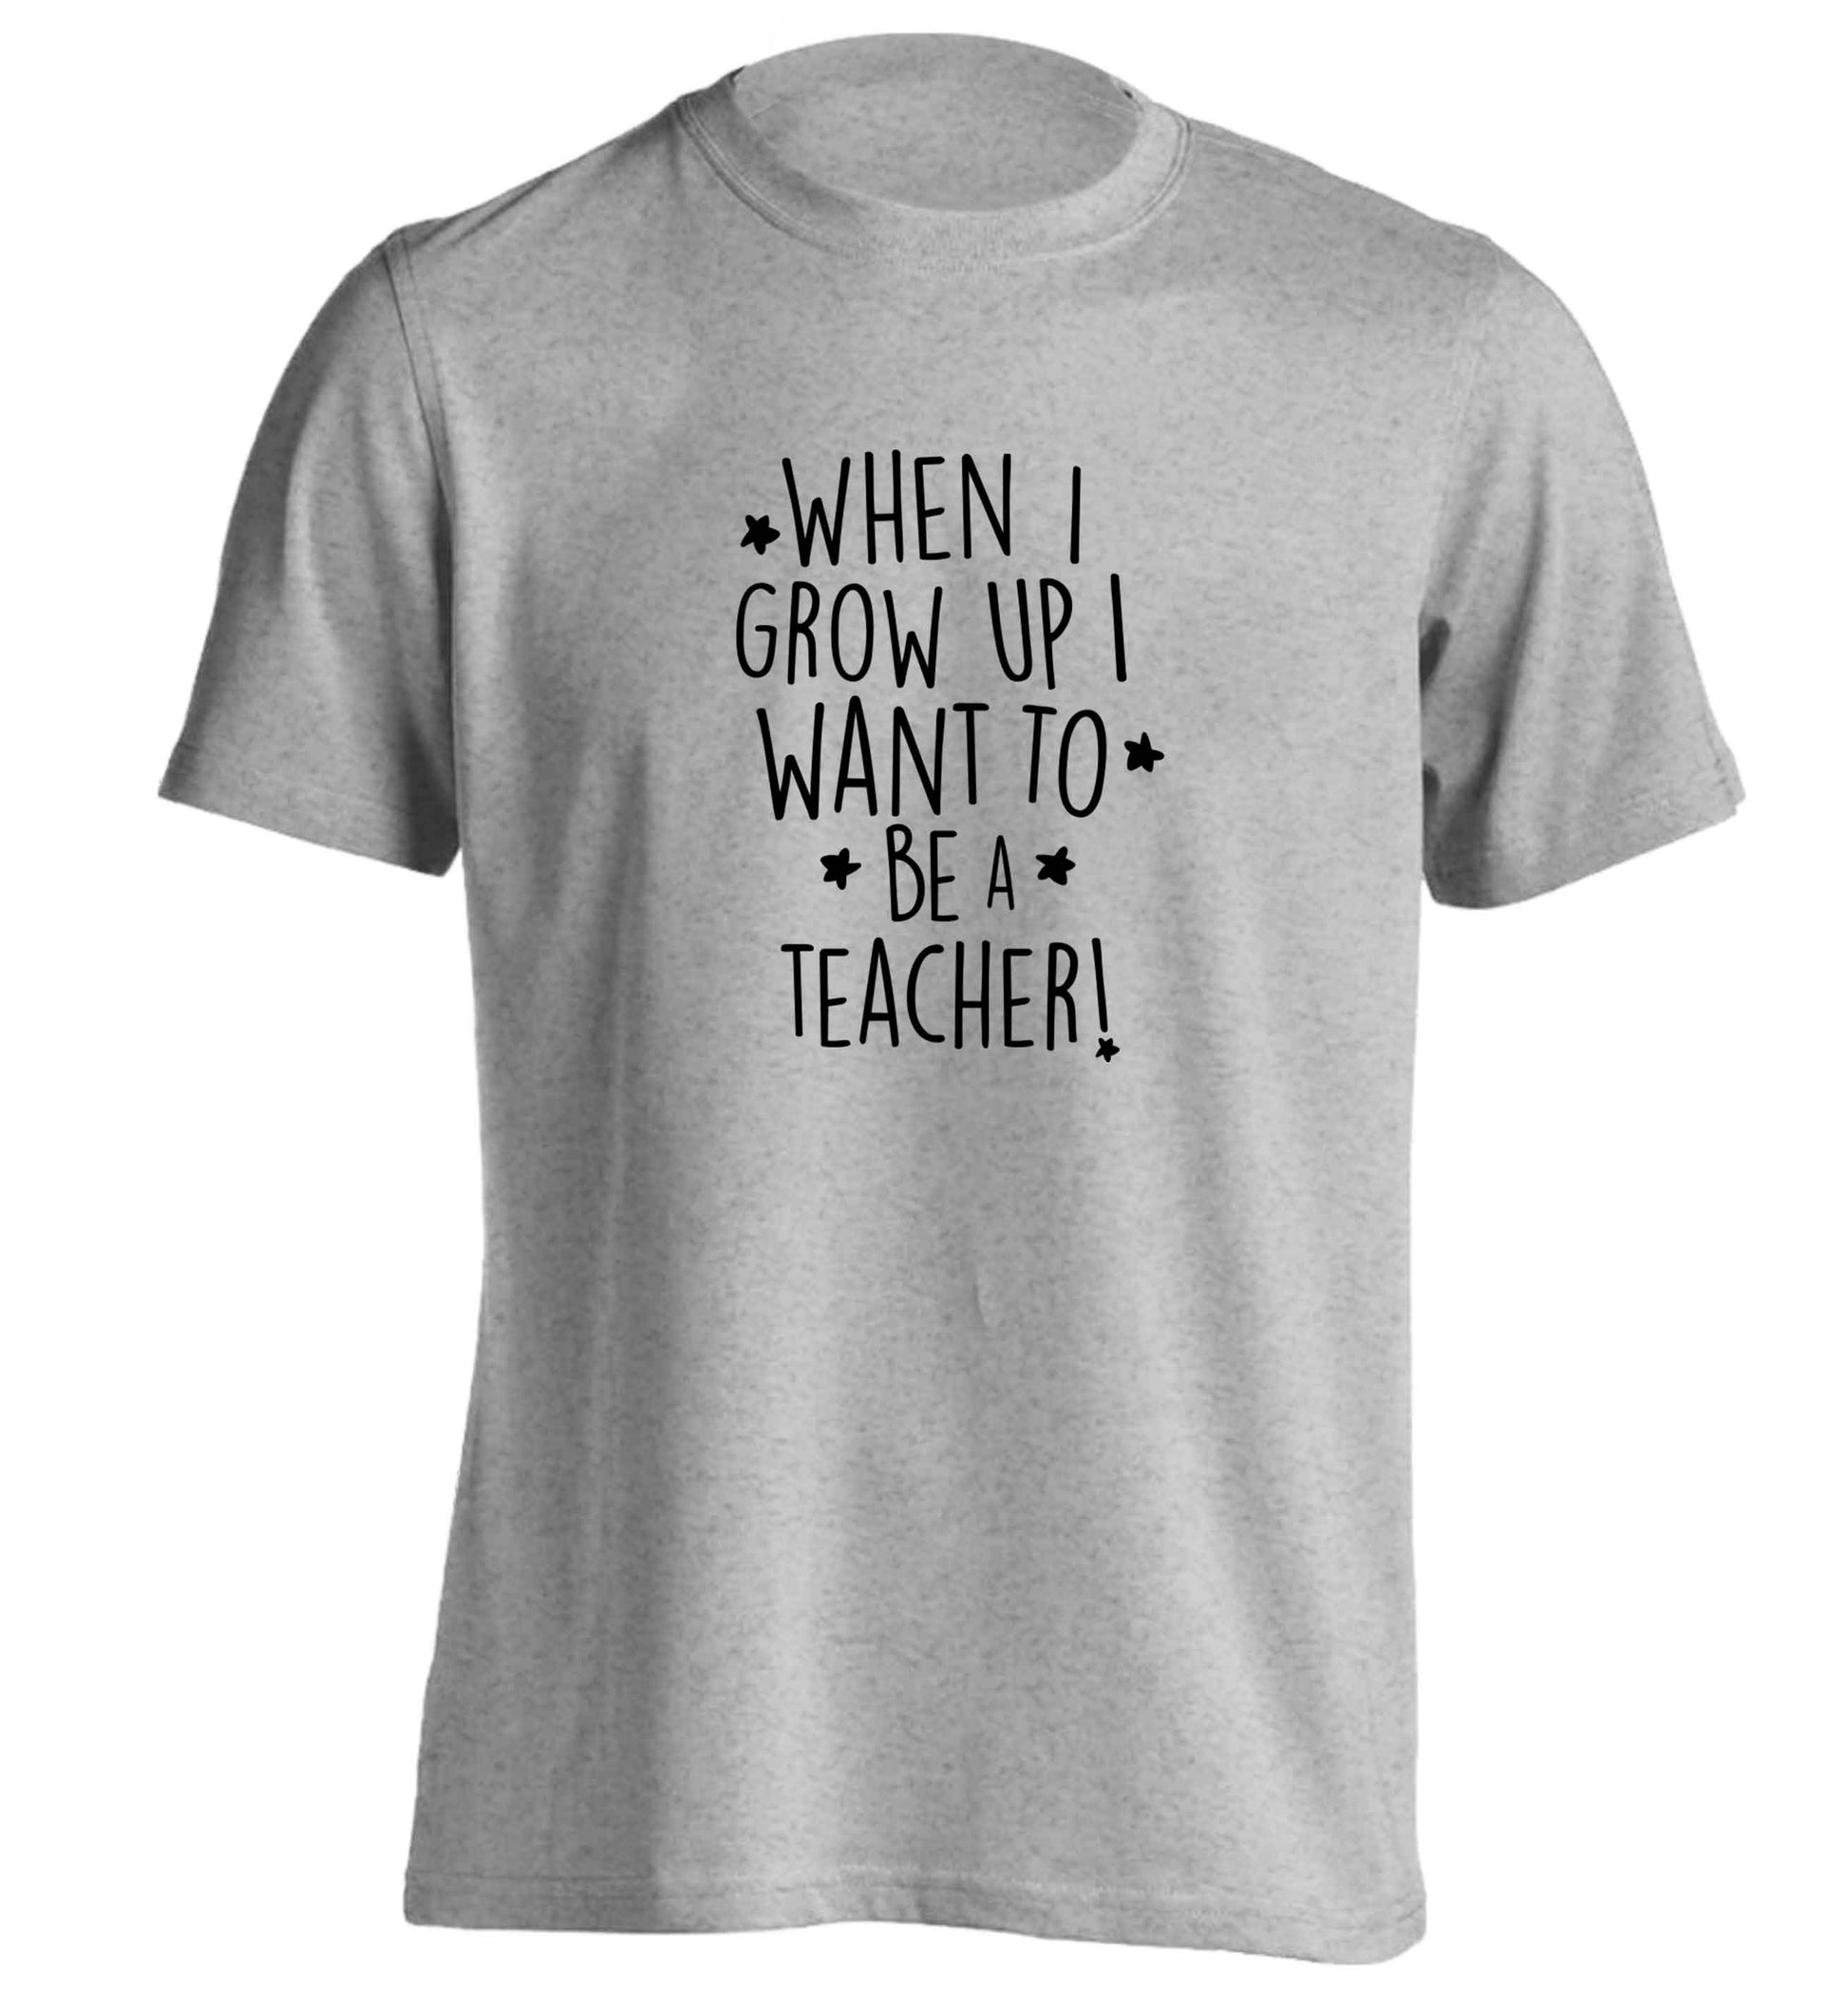 When I grow up I want to be a teacher adults unisex grey Tshirt 2XL